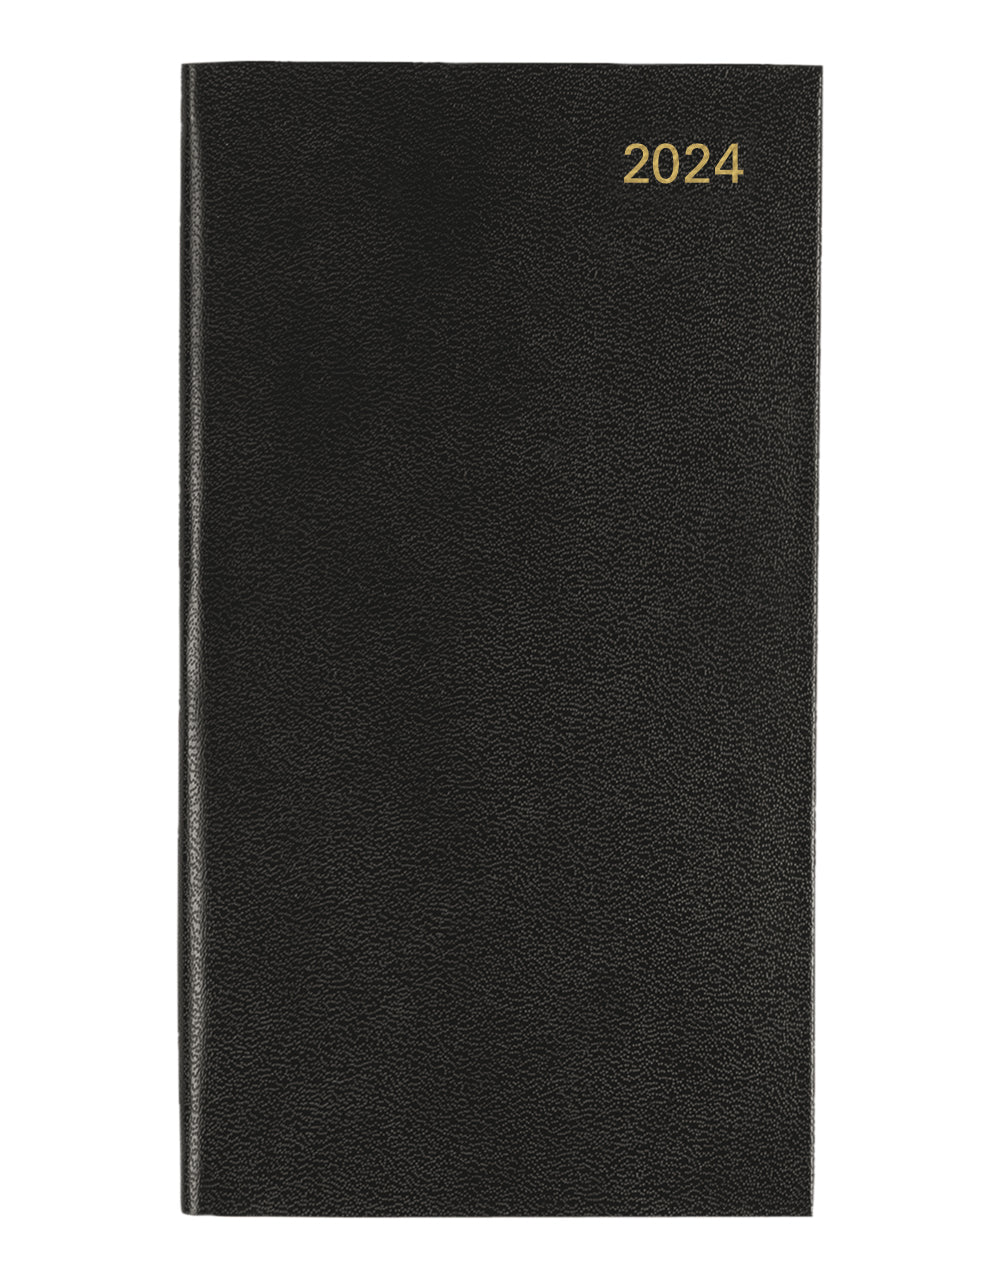 Principal Compact Week to View Planner 2024 - English@color_black